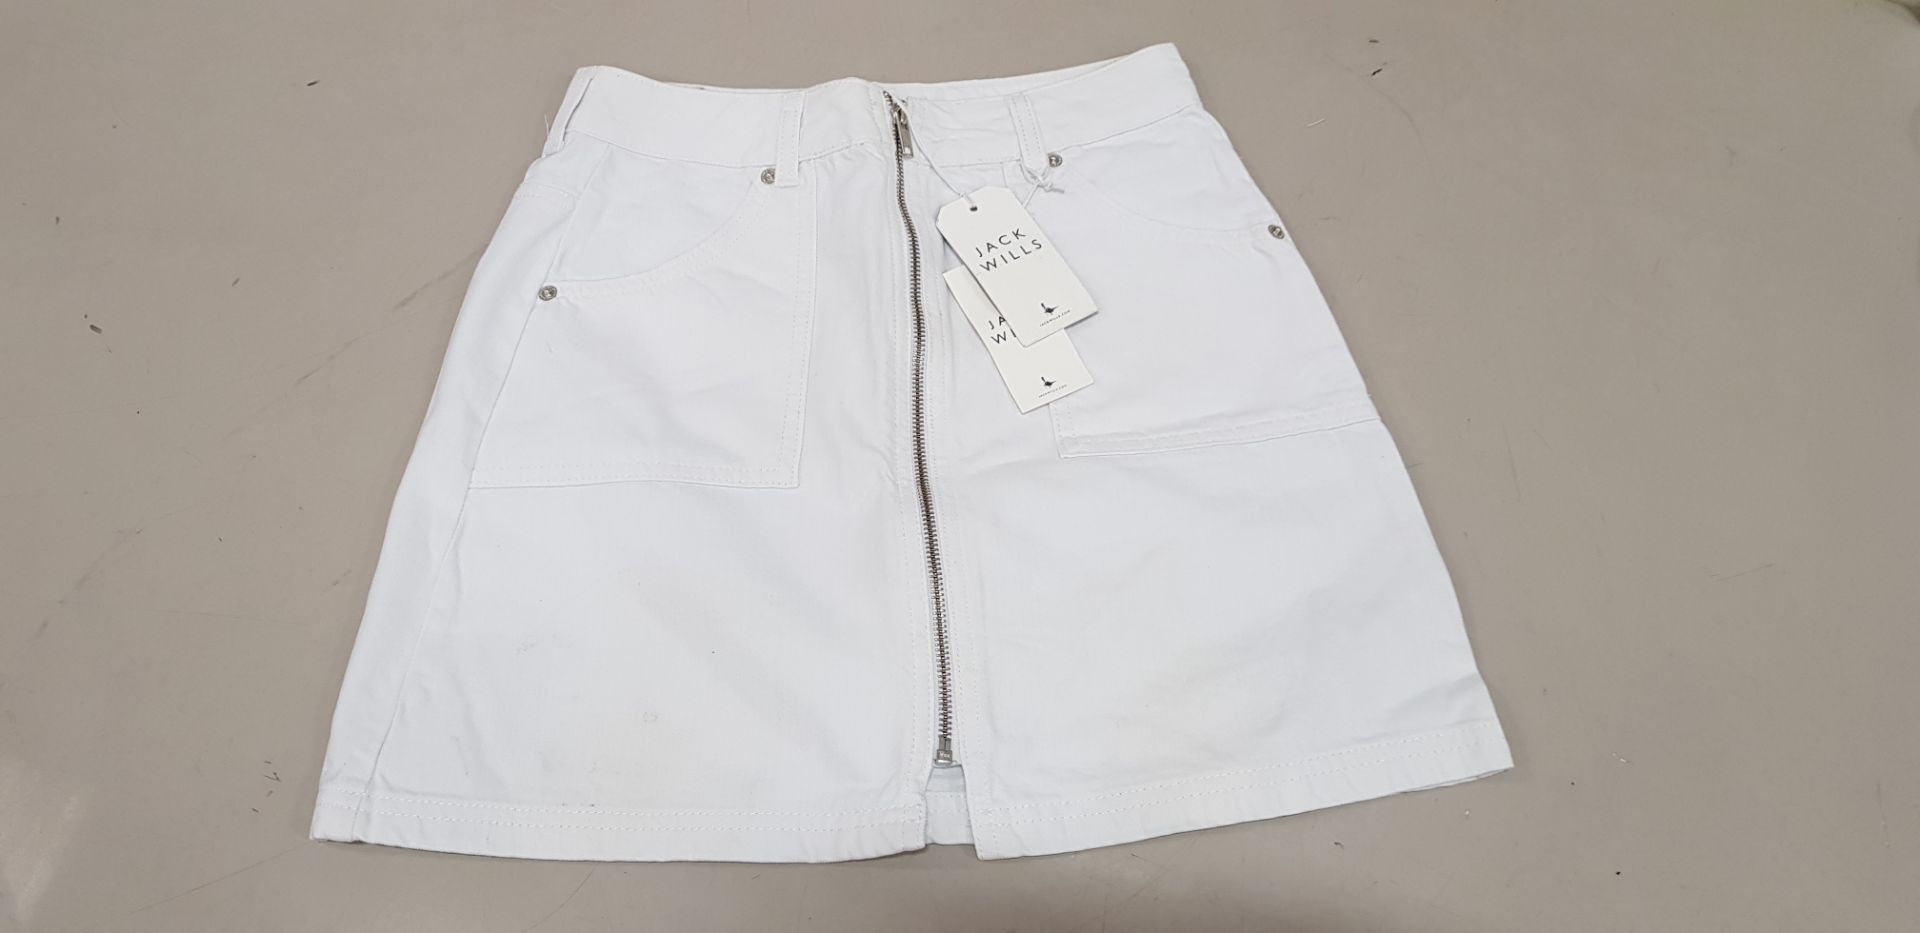 13 X BRAND NEW JACK WILLS CHARTHAM ZIP SKIRTS IN WHITE UK SIZE 6 (NOTE STAINING FROM LABEL ON BACK -